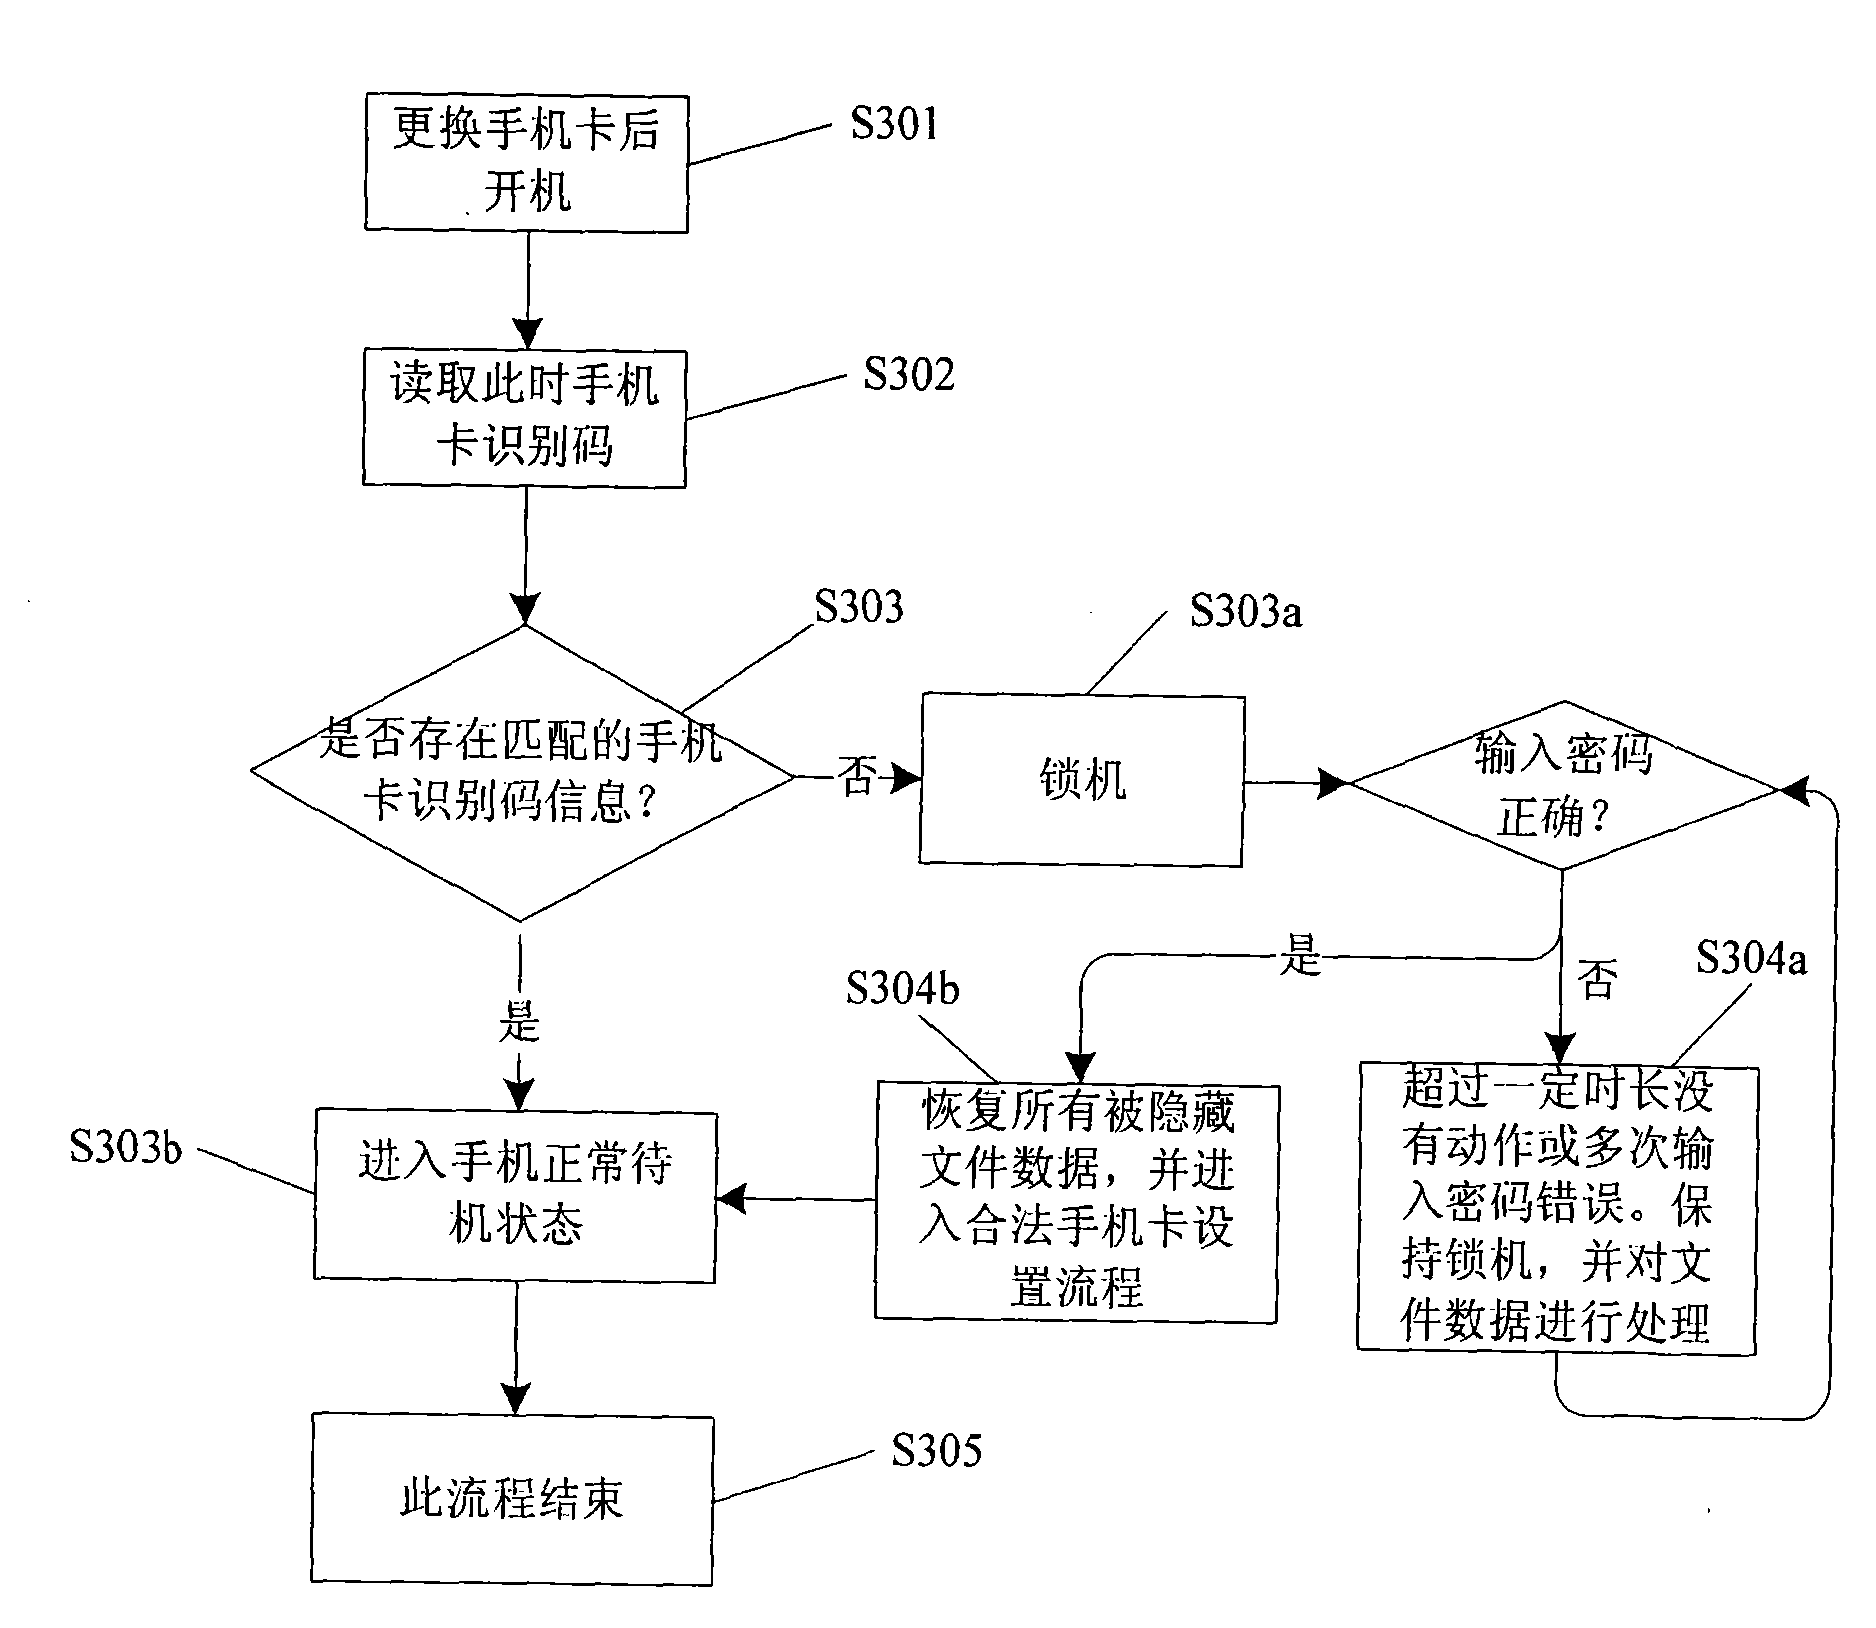 Method and system for protecting individual privacy in mobile phone